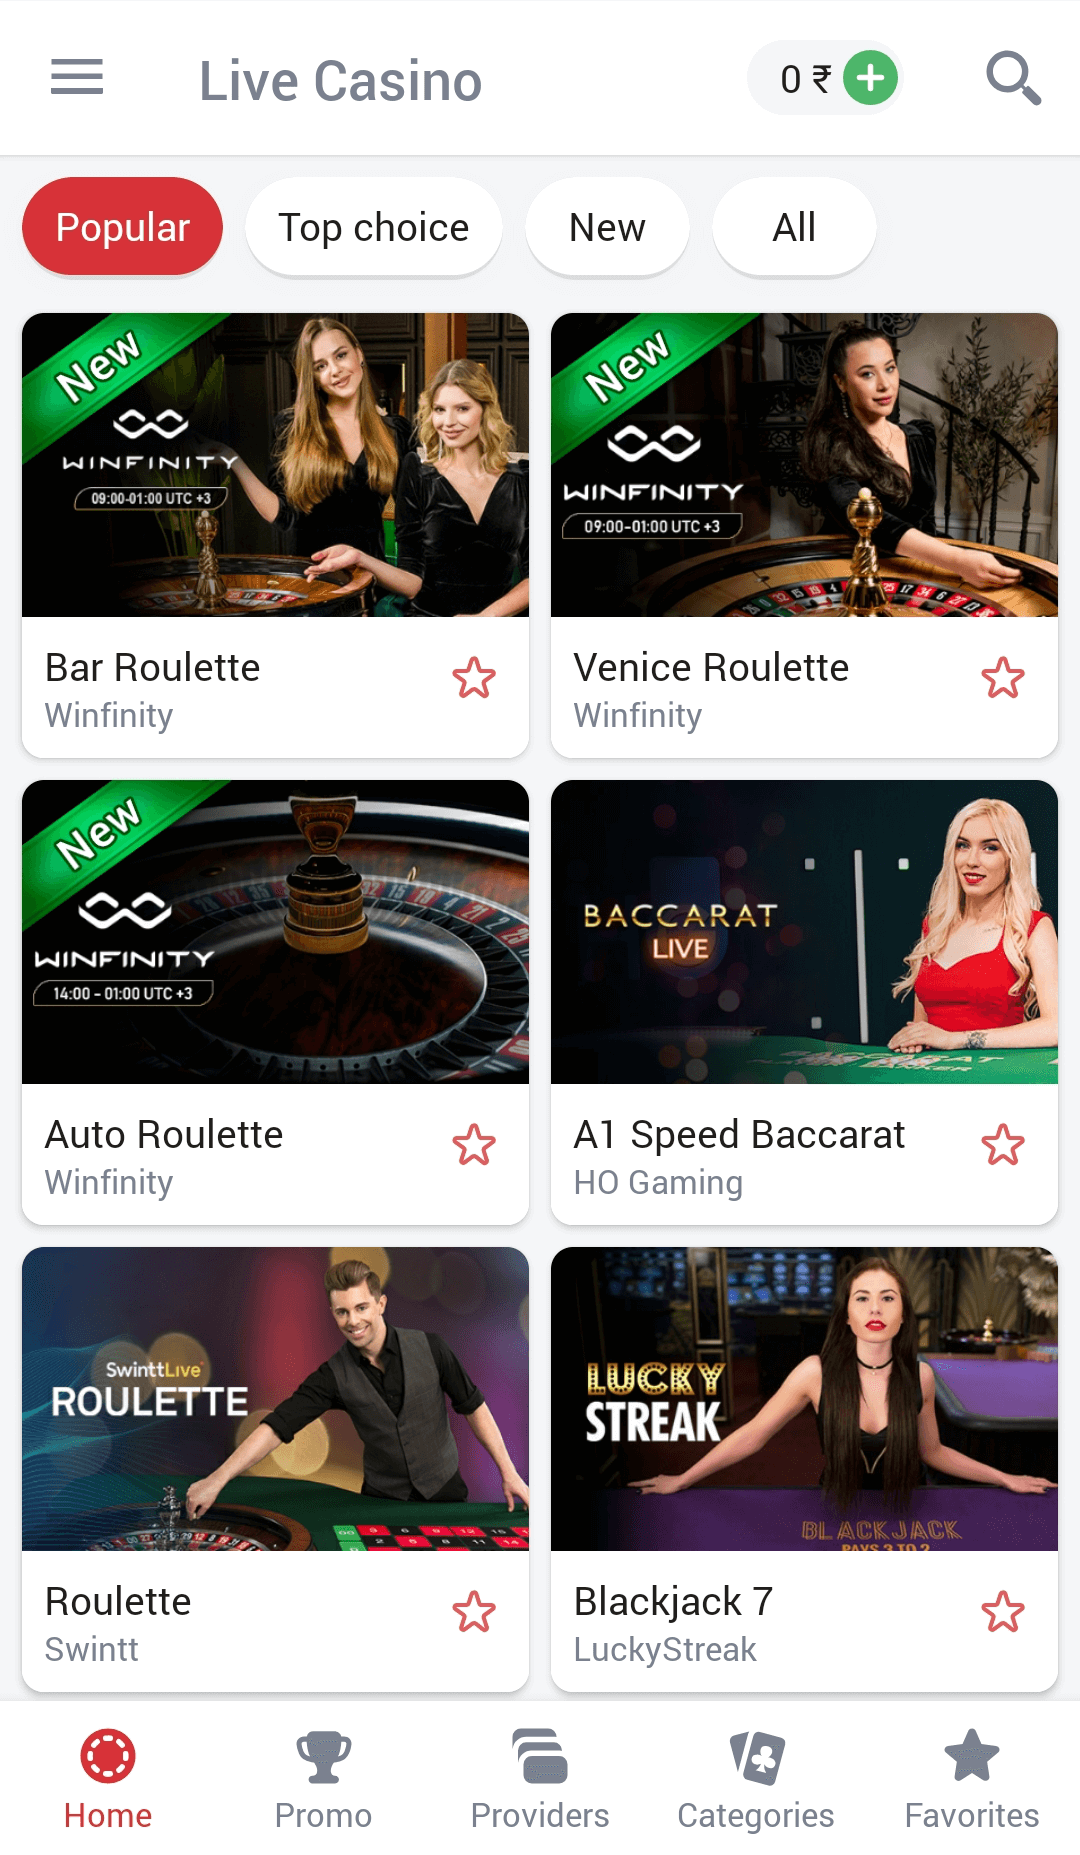 Live casino section on the 888Starz app